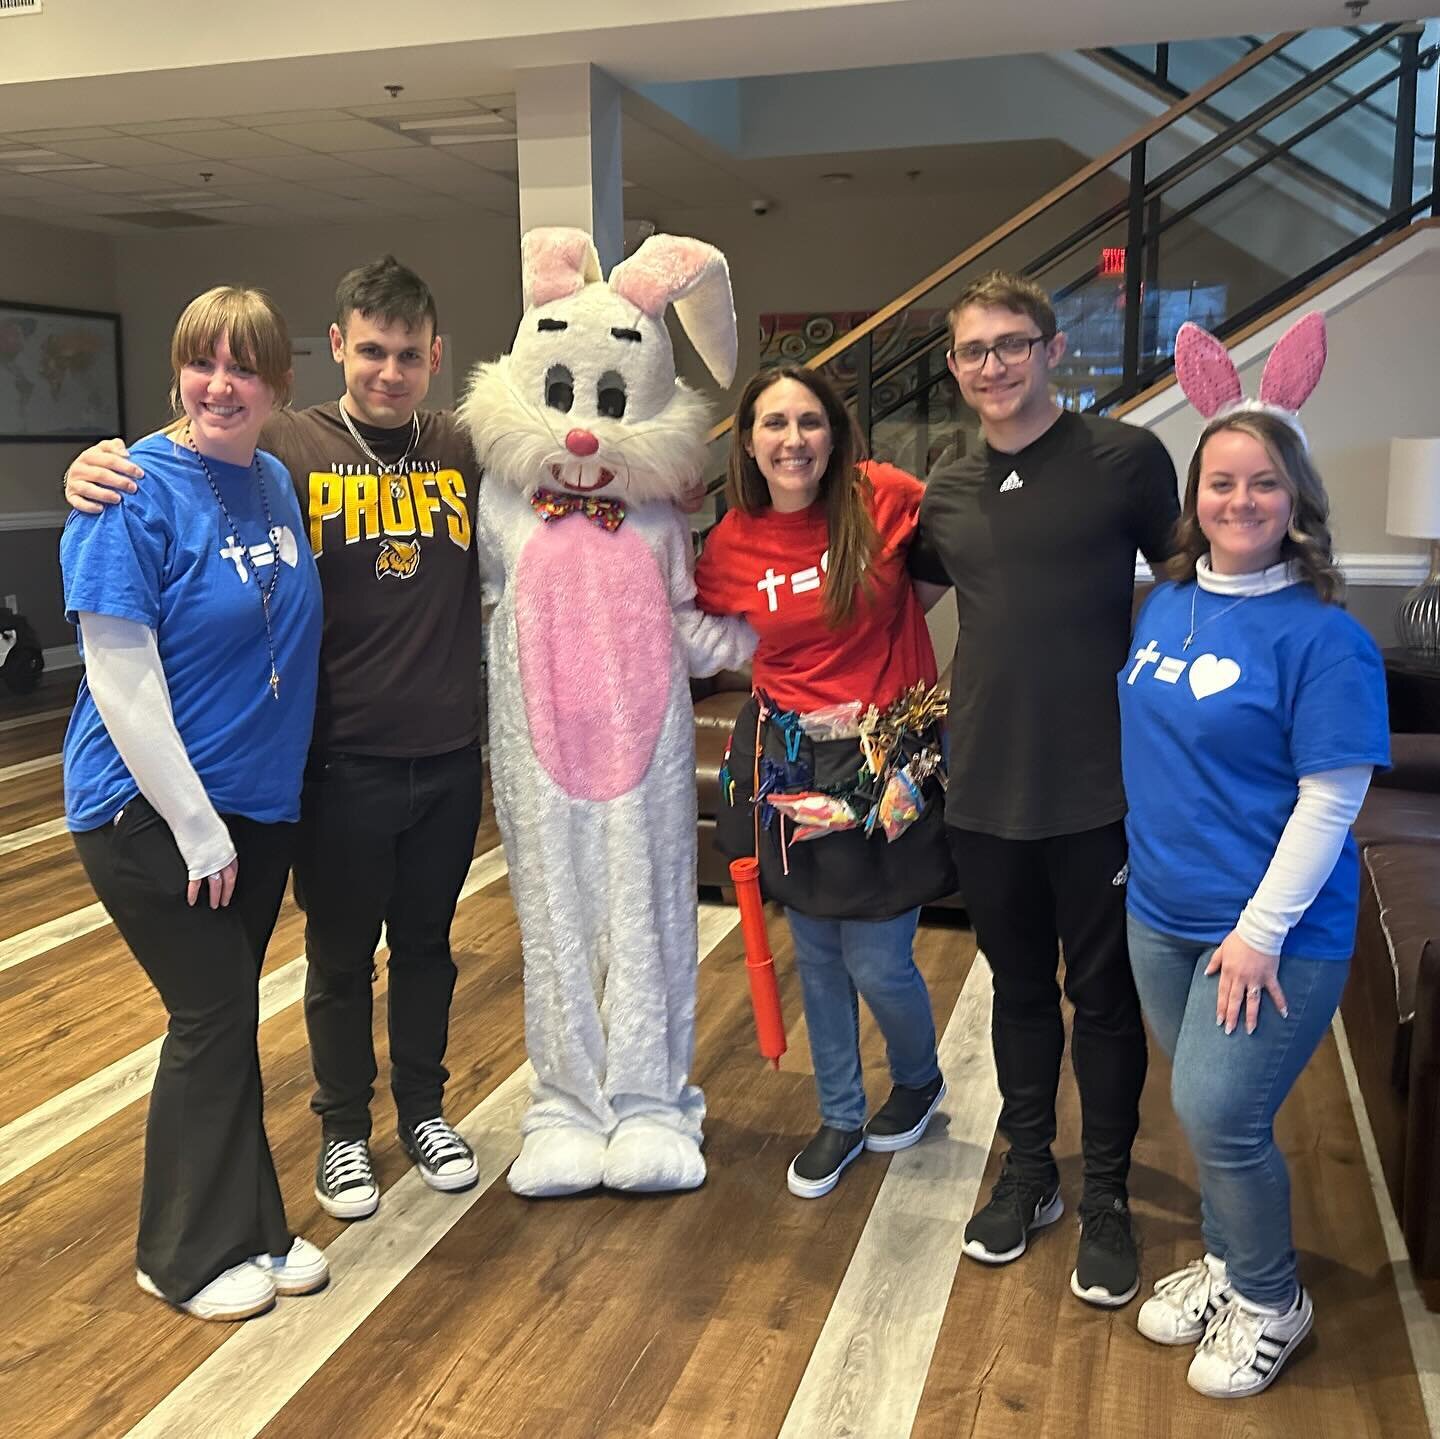 The Easter Bunny was out this week visiting the guests at the @rmhsnj! I got to volunteer with my students from @rowancatholic to make &amp; serve dinner as well as entertain the guests! It&rsquo;s always a beautiful time at this special home! 🐰

#s